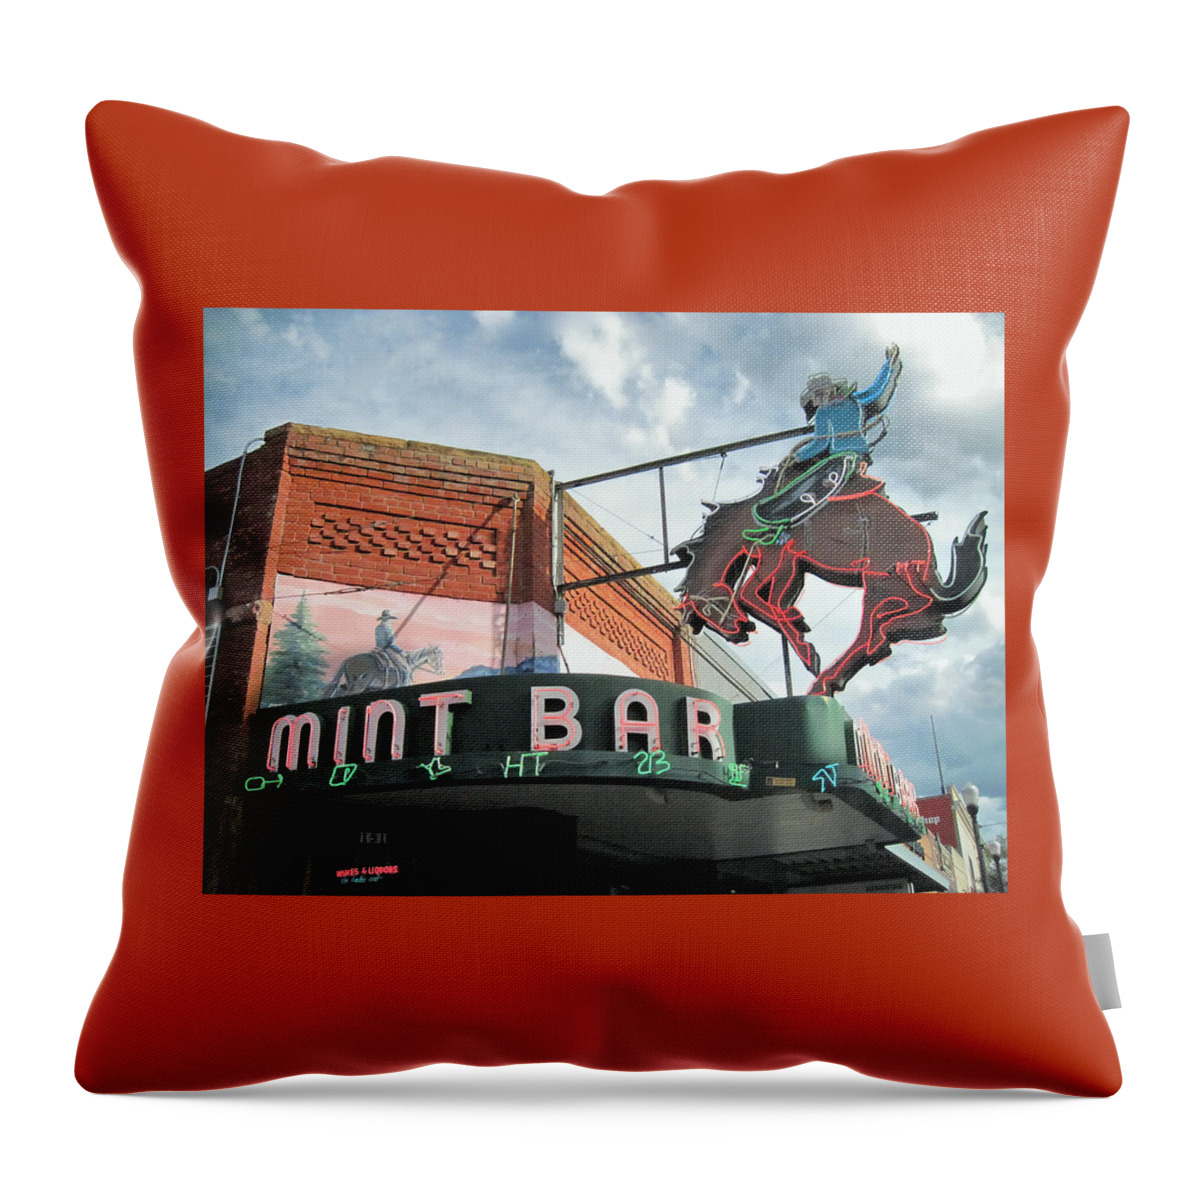 Landscapes Throw Pillow featuring the photograph Mint Bar Sheridan Wyoming by Mary Lee Dereske